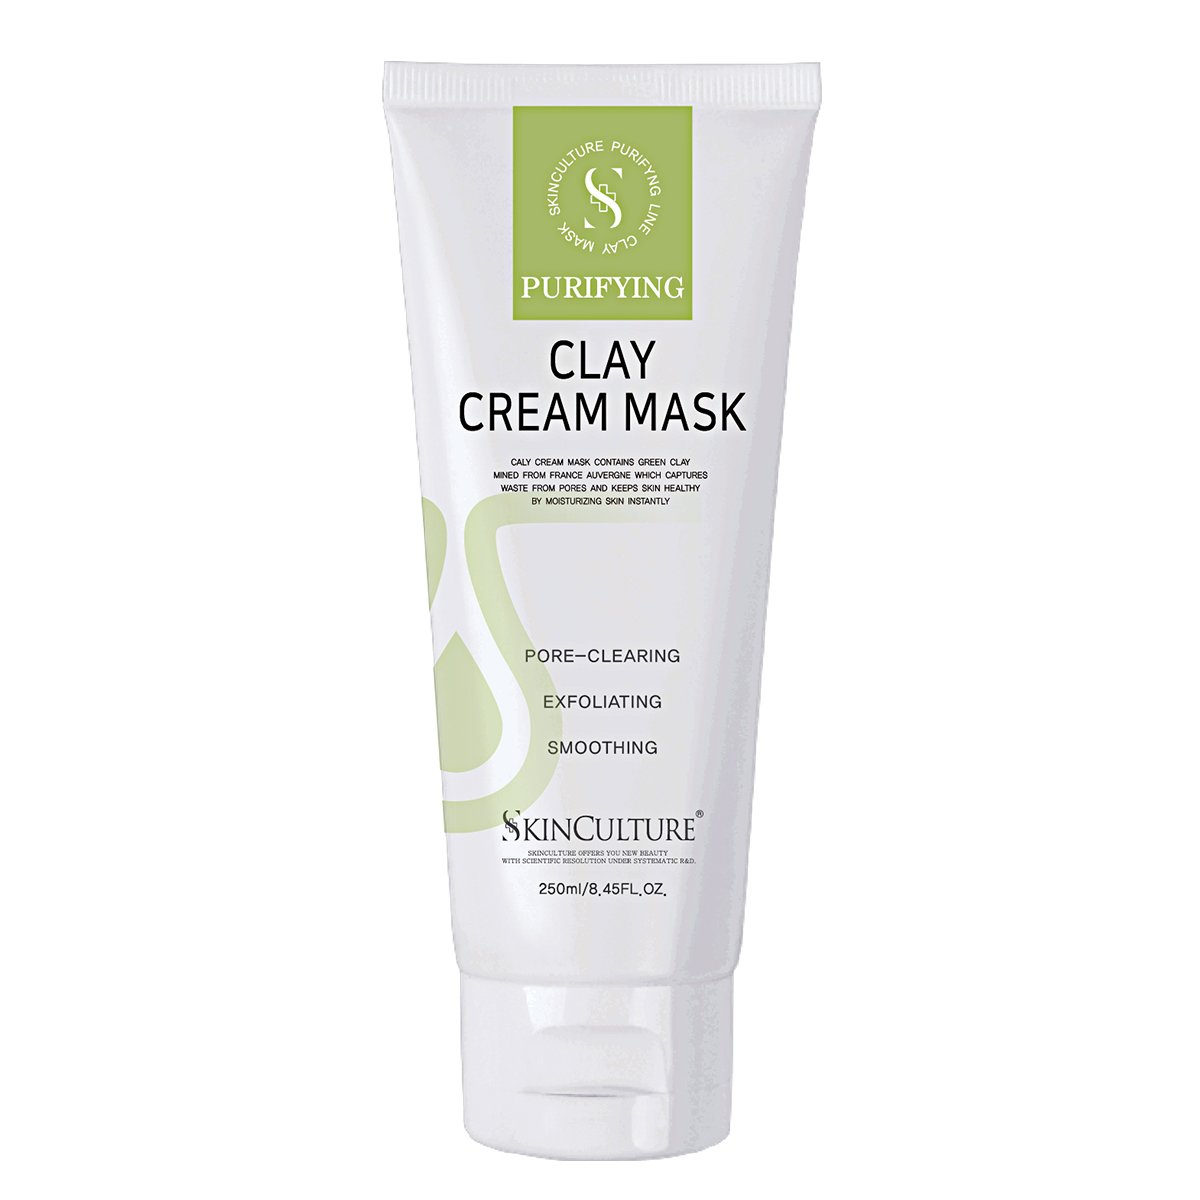 Purifying Clay Cream Mask